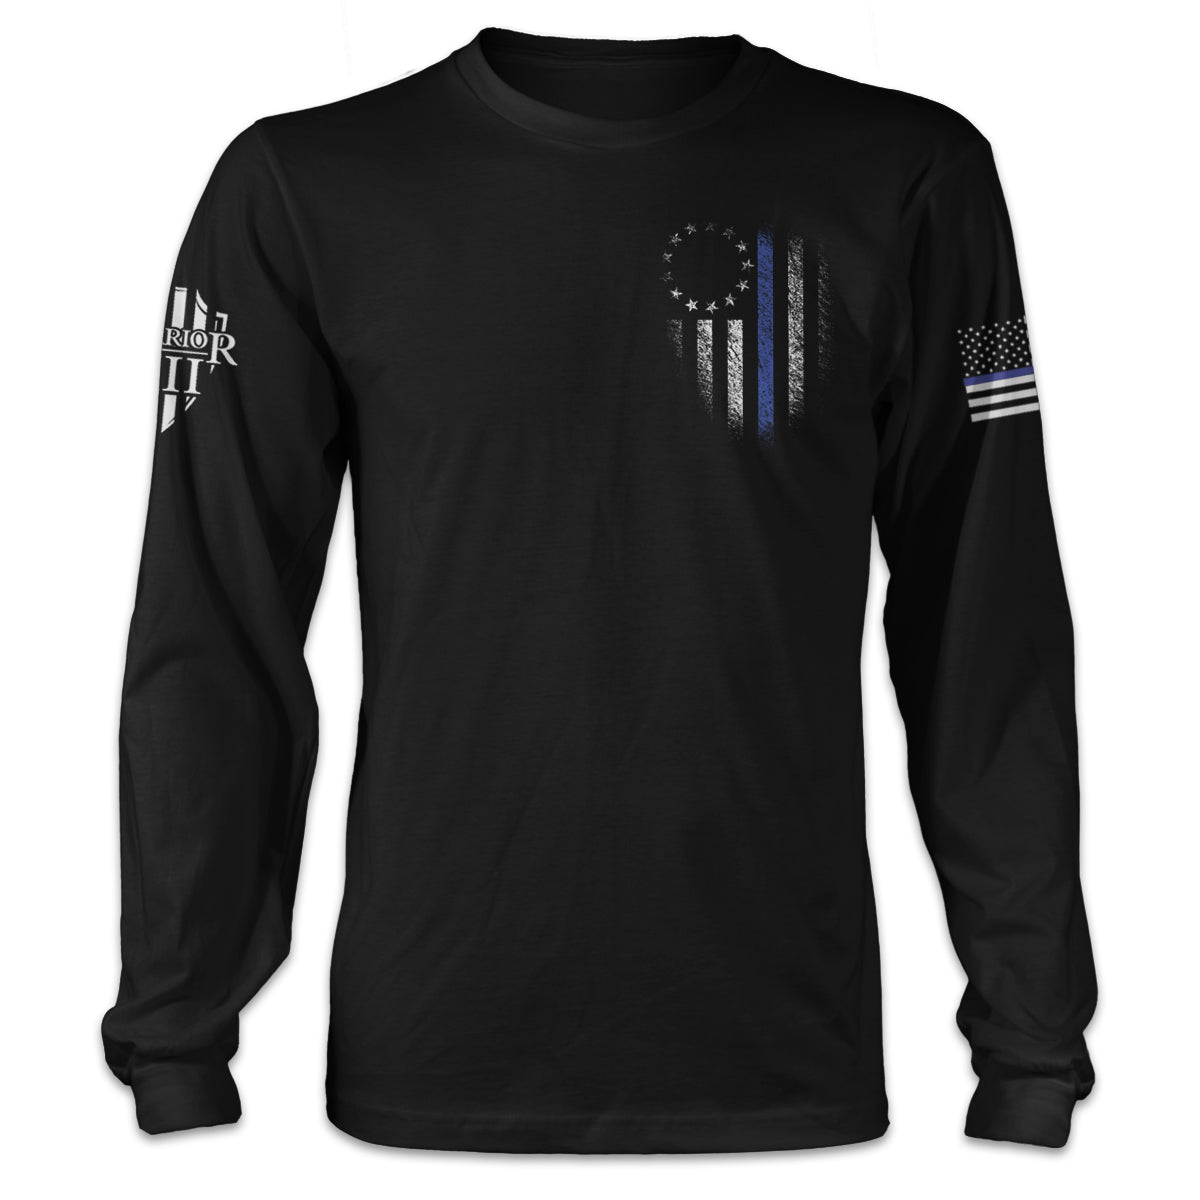 A black long sleeve shirt with the thin blue line betsy ross flag printed on the front left chest of the shirt.